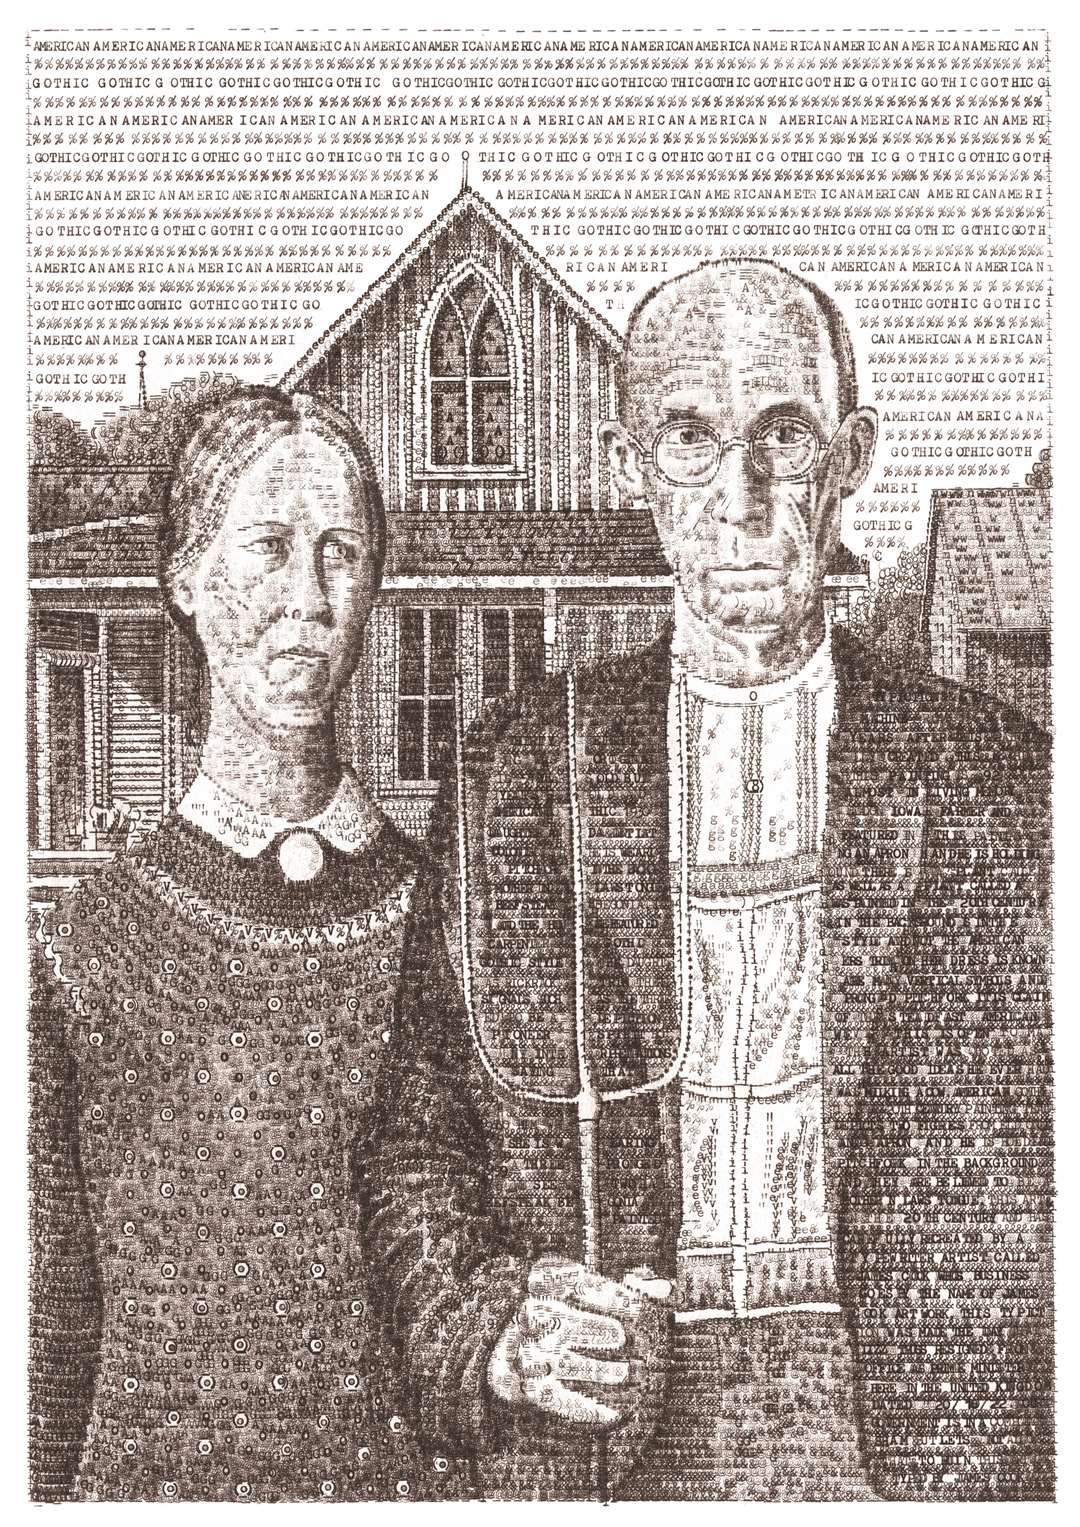 James Cook’s version of American Gothic (James Cook)